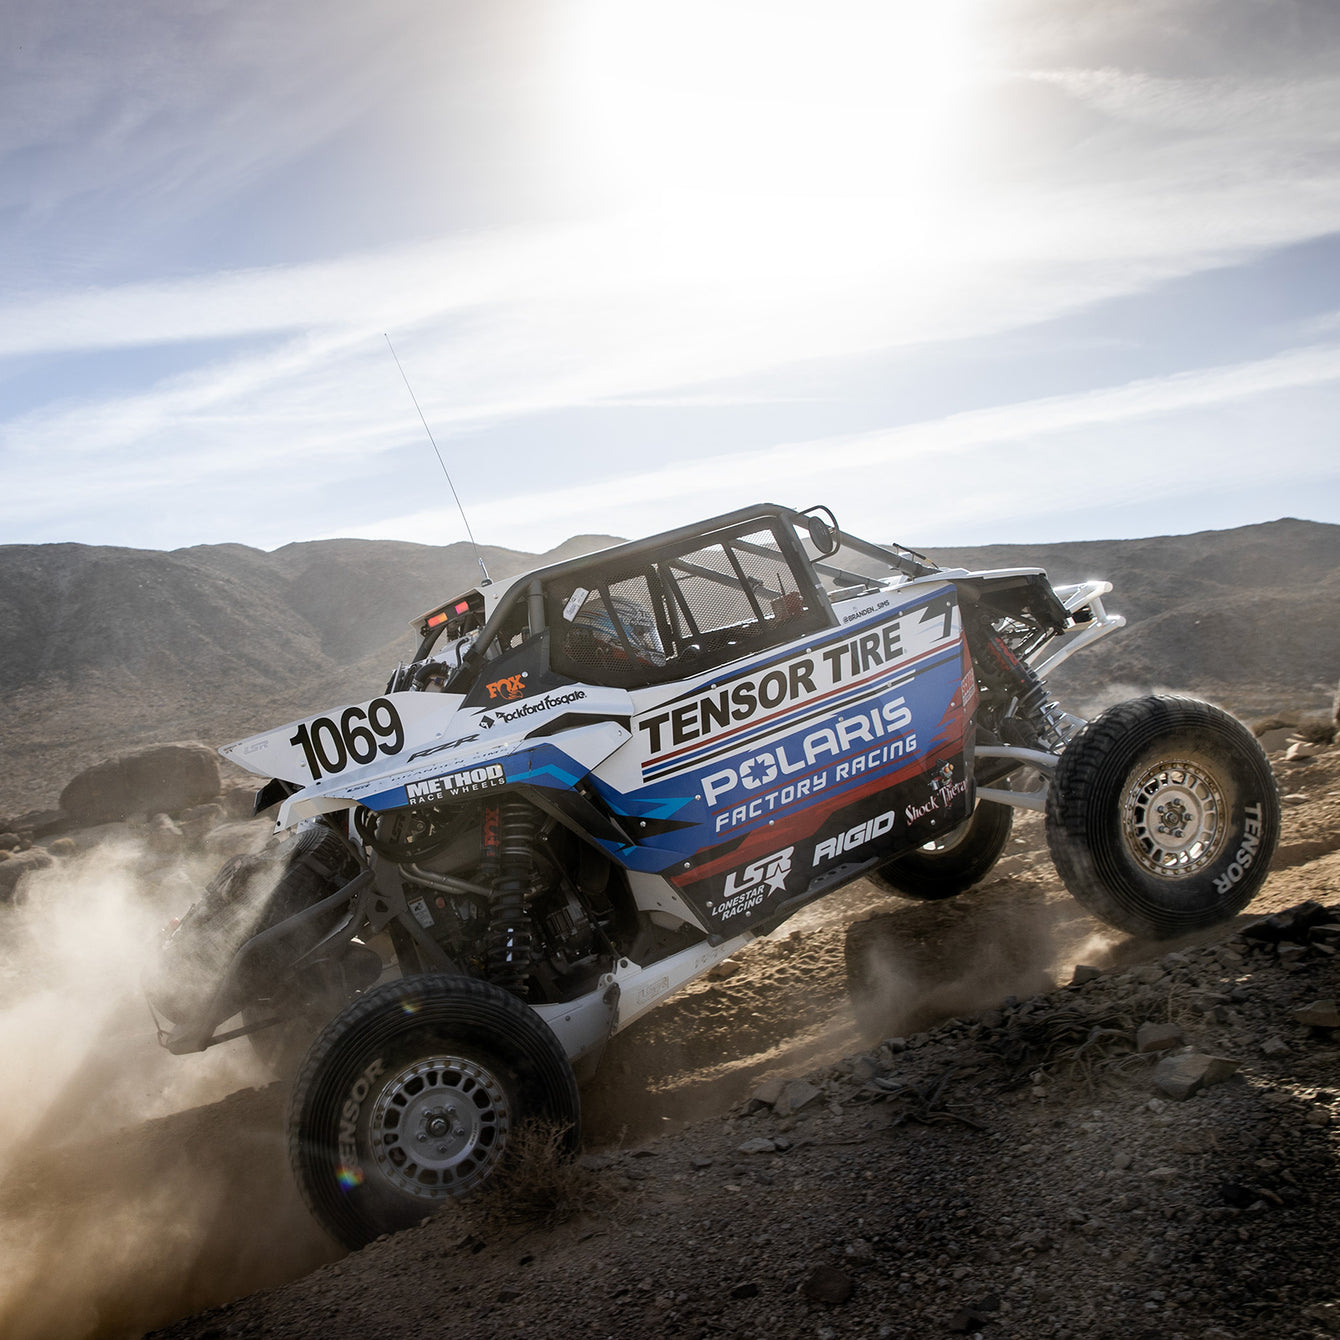 TENSOR WINS AT KING OF THE HAMMERS